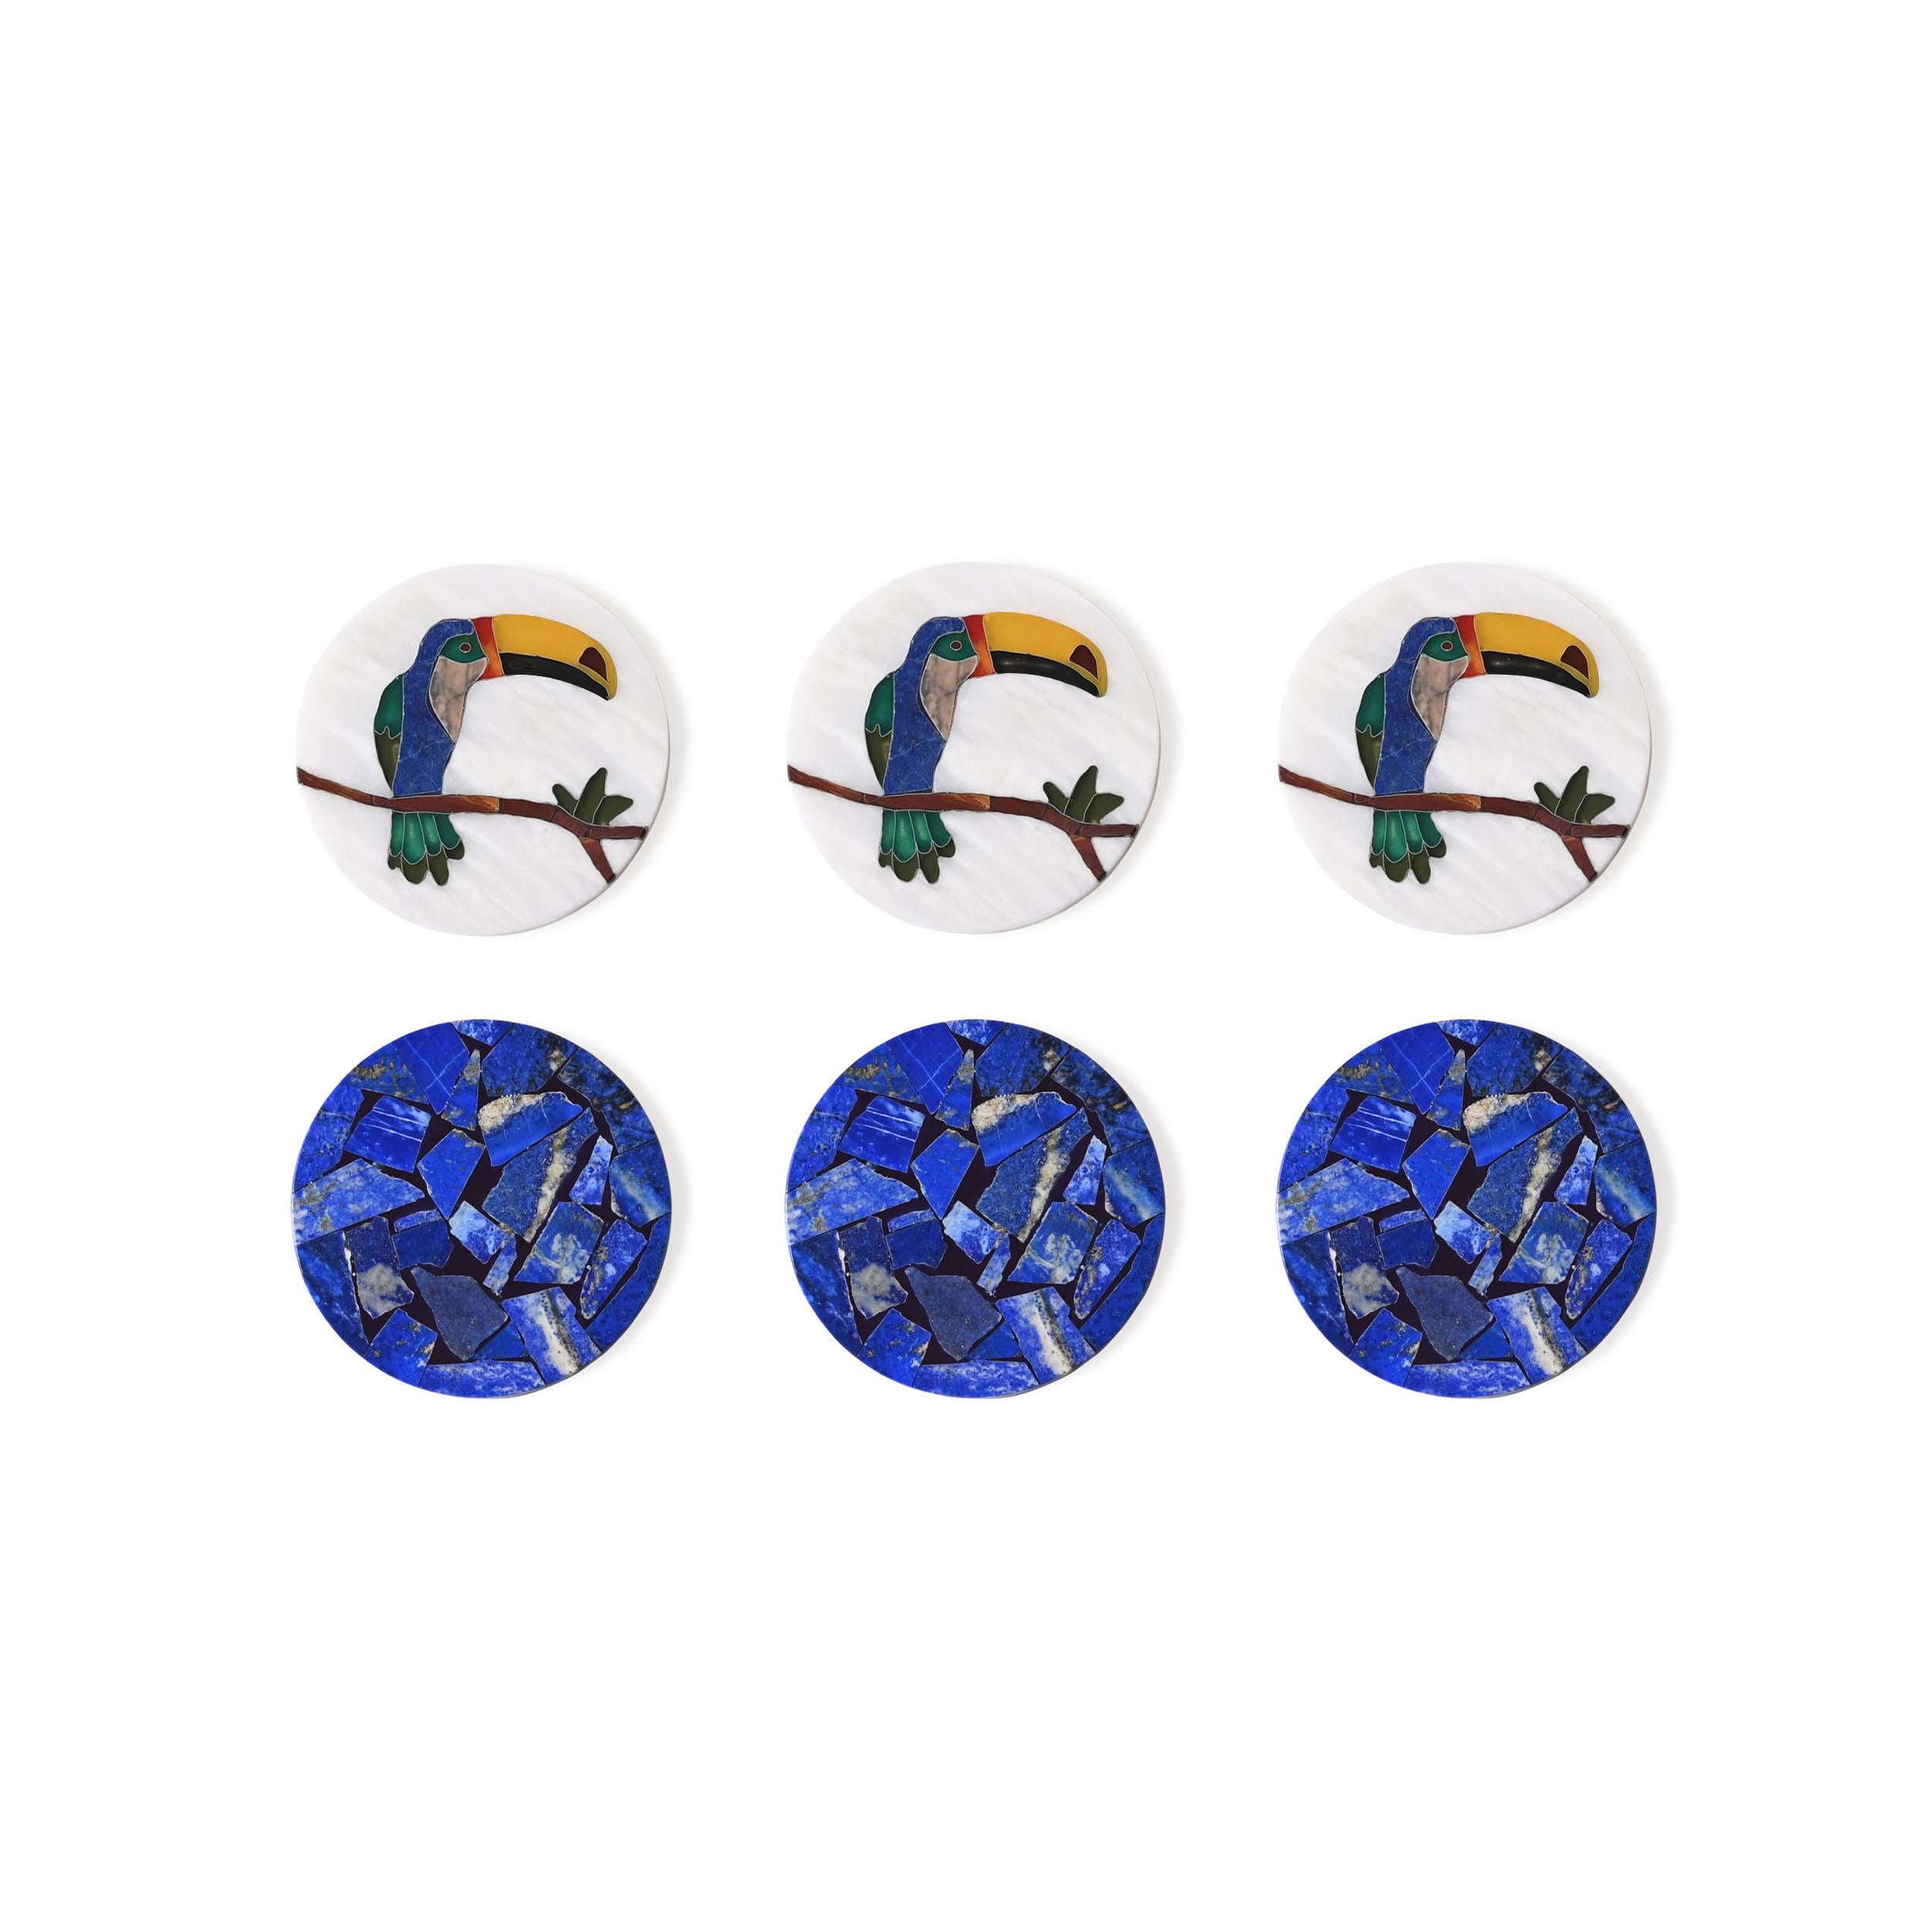 Toucan coasters by Studio Lel
Dimensions: D10 x H10 x H0.6 cm
Materials: Lapis Lazuli, Jade, Jasper, Marble

These are handmade from semiprecious stone and marble in a small artisanal workshop. Please note that variations and slight